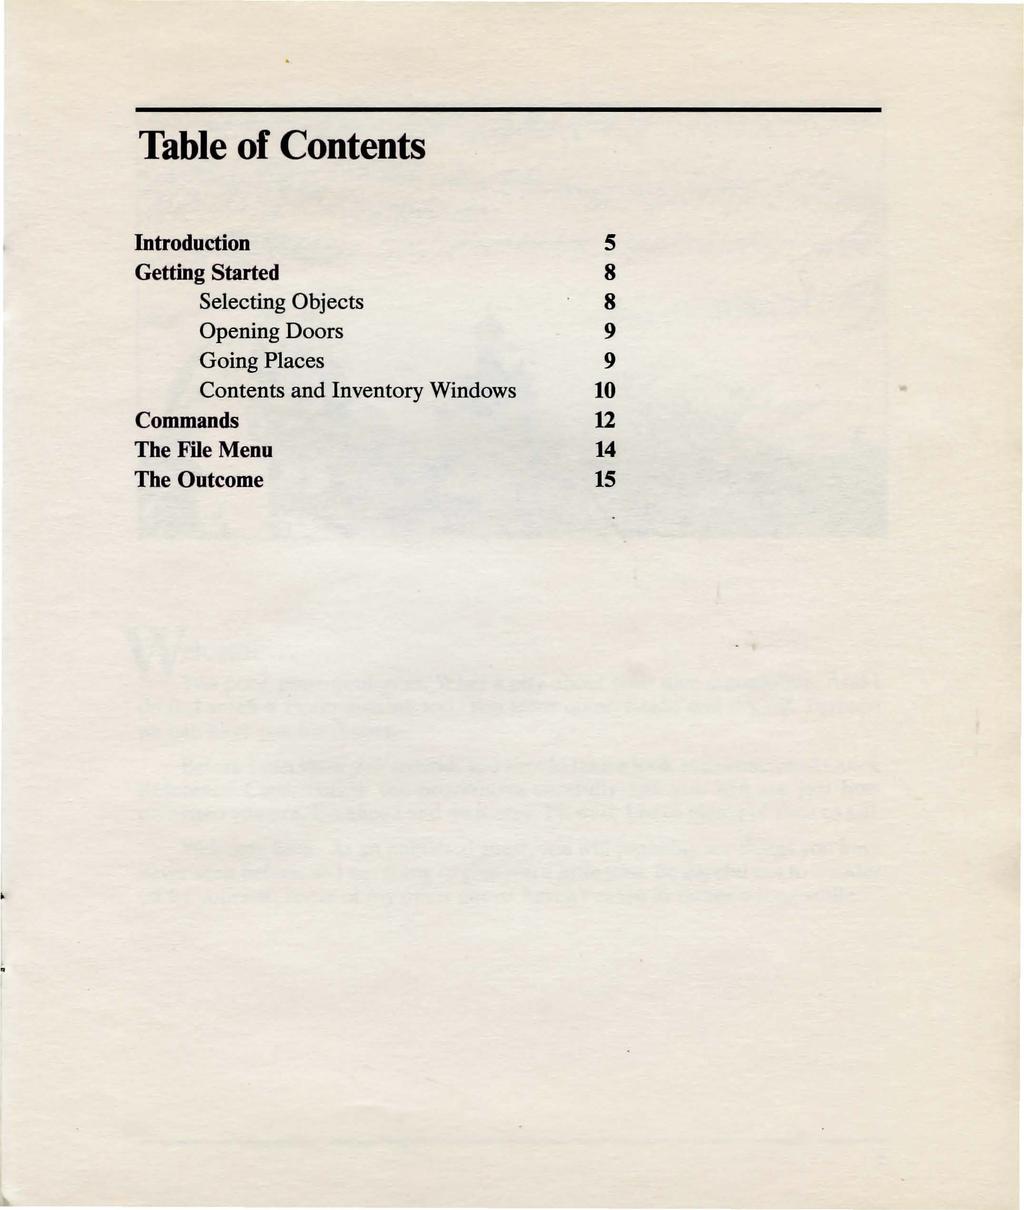 Table of Contents Introduction 5 Getting Started 8 Selecting Objects 8 Opening Doors 9